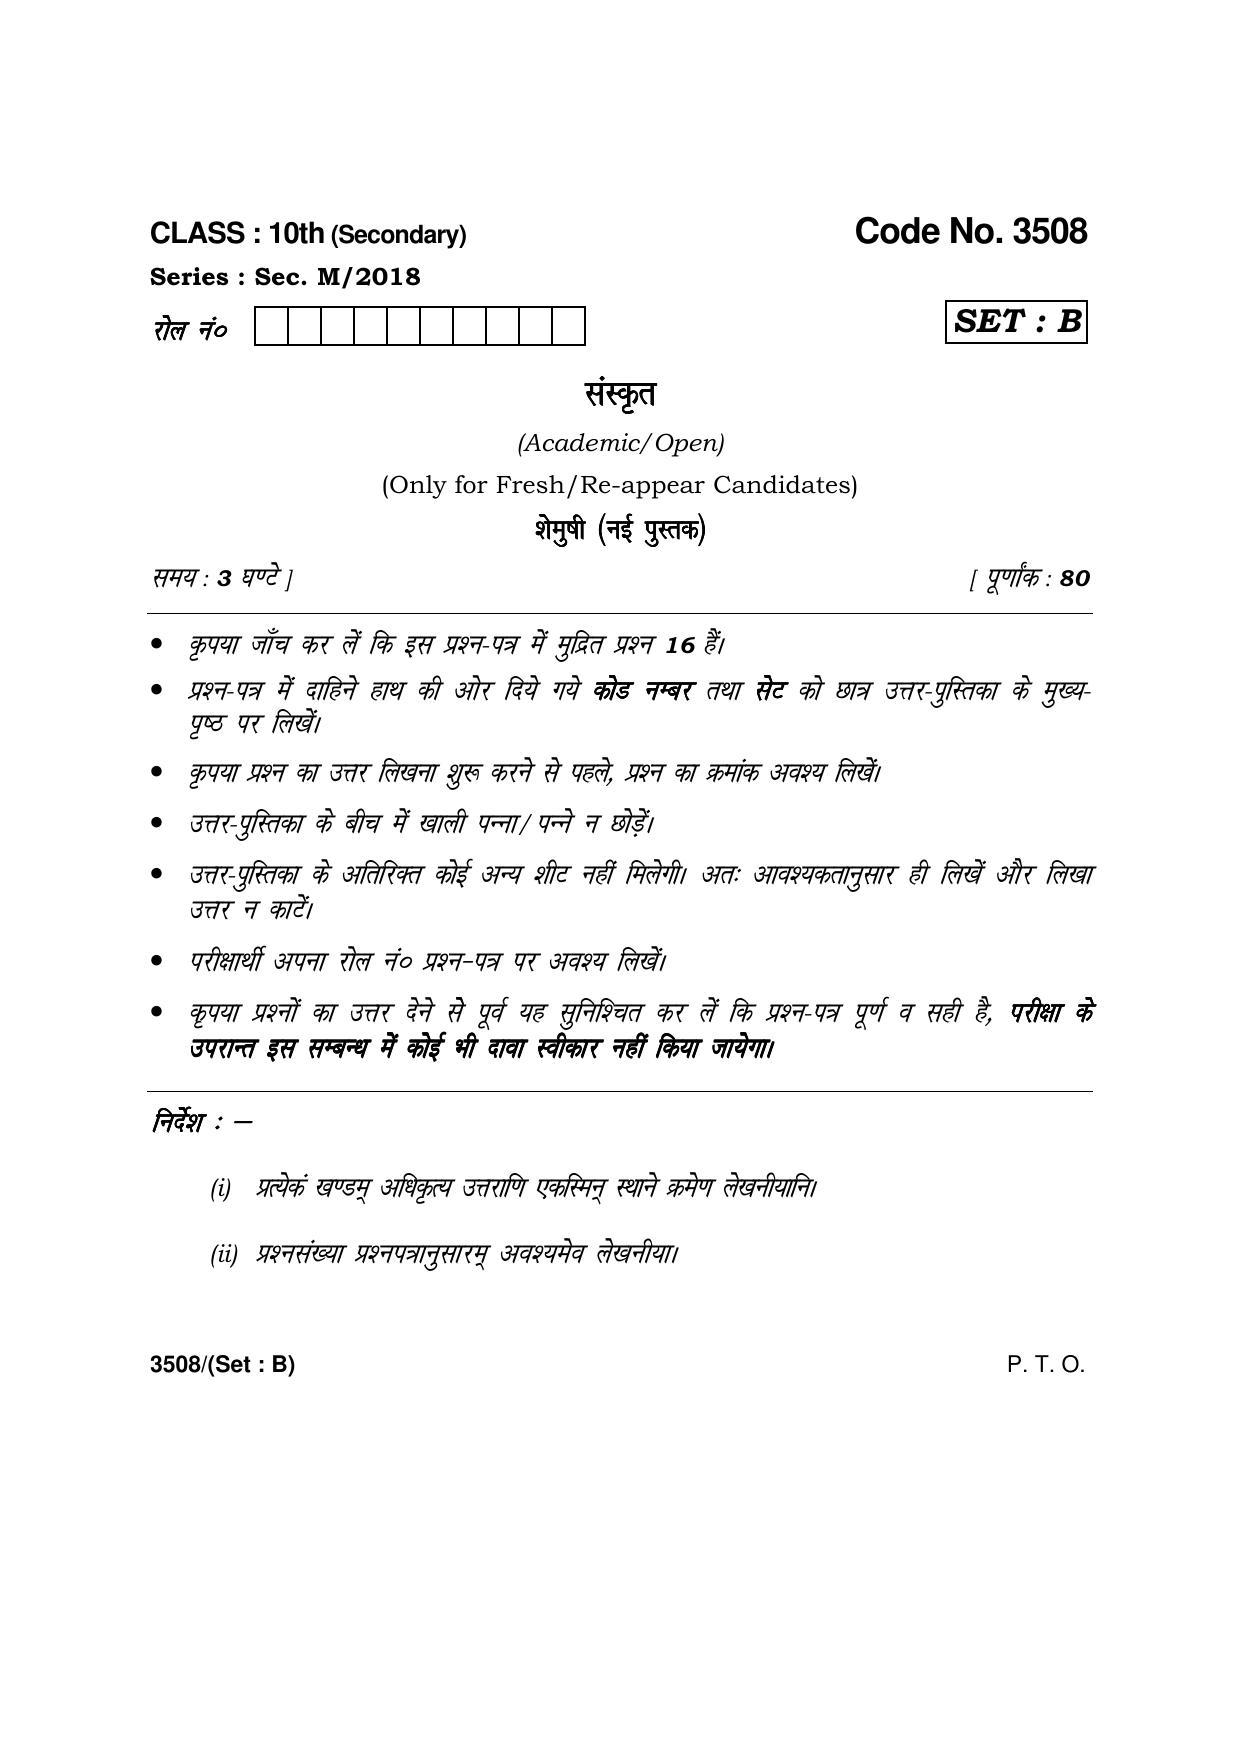 Haryana Board HBSE Class 10 Sanskrit -B 2018 Question Paper - Page 1